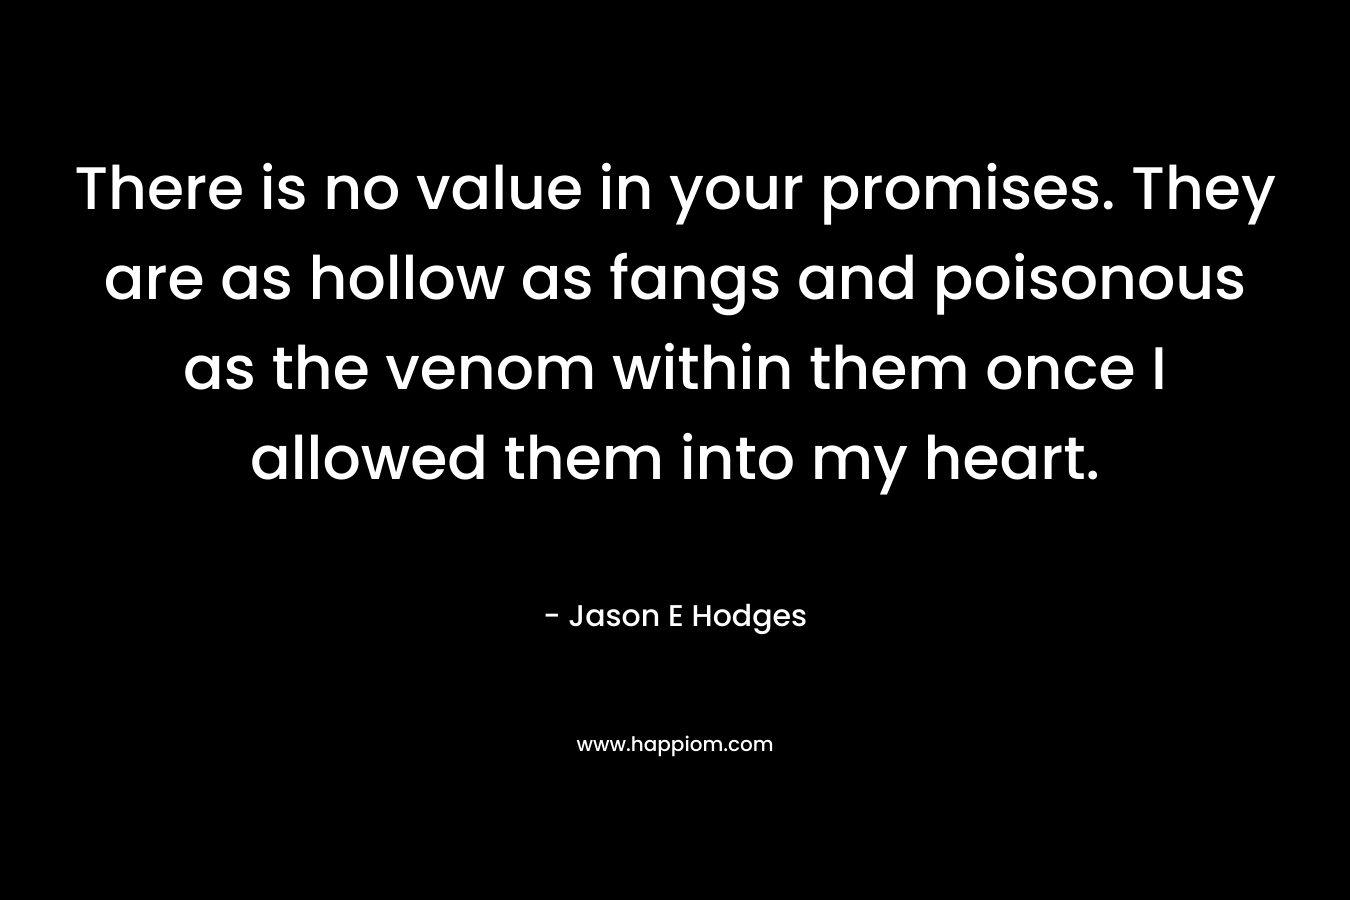 There is no value in your promises. They are as hollow as fangs and poisonous as the venom within them once I allowed them into my heart. – Jason E Hodges